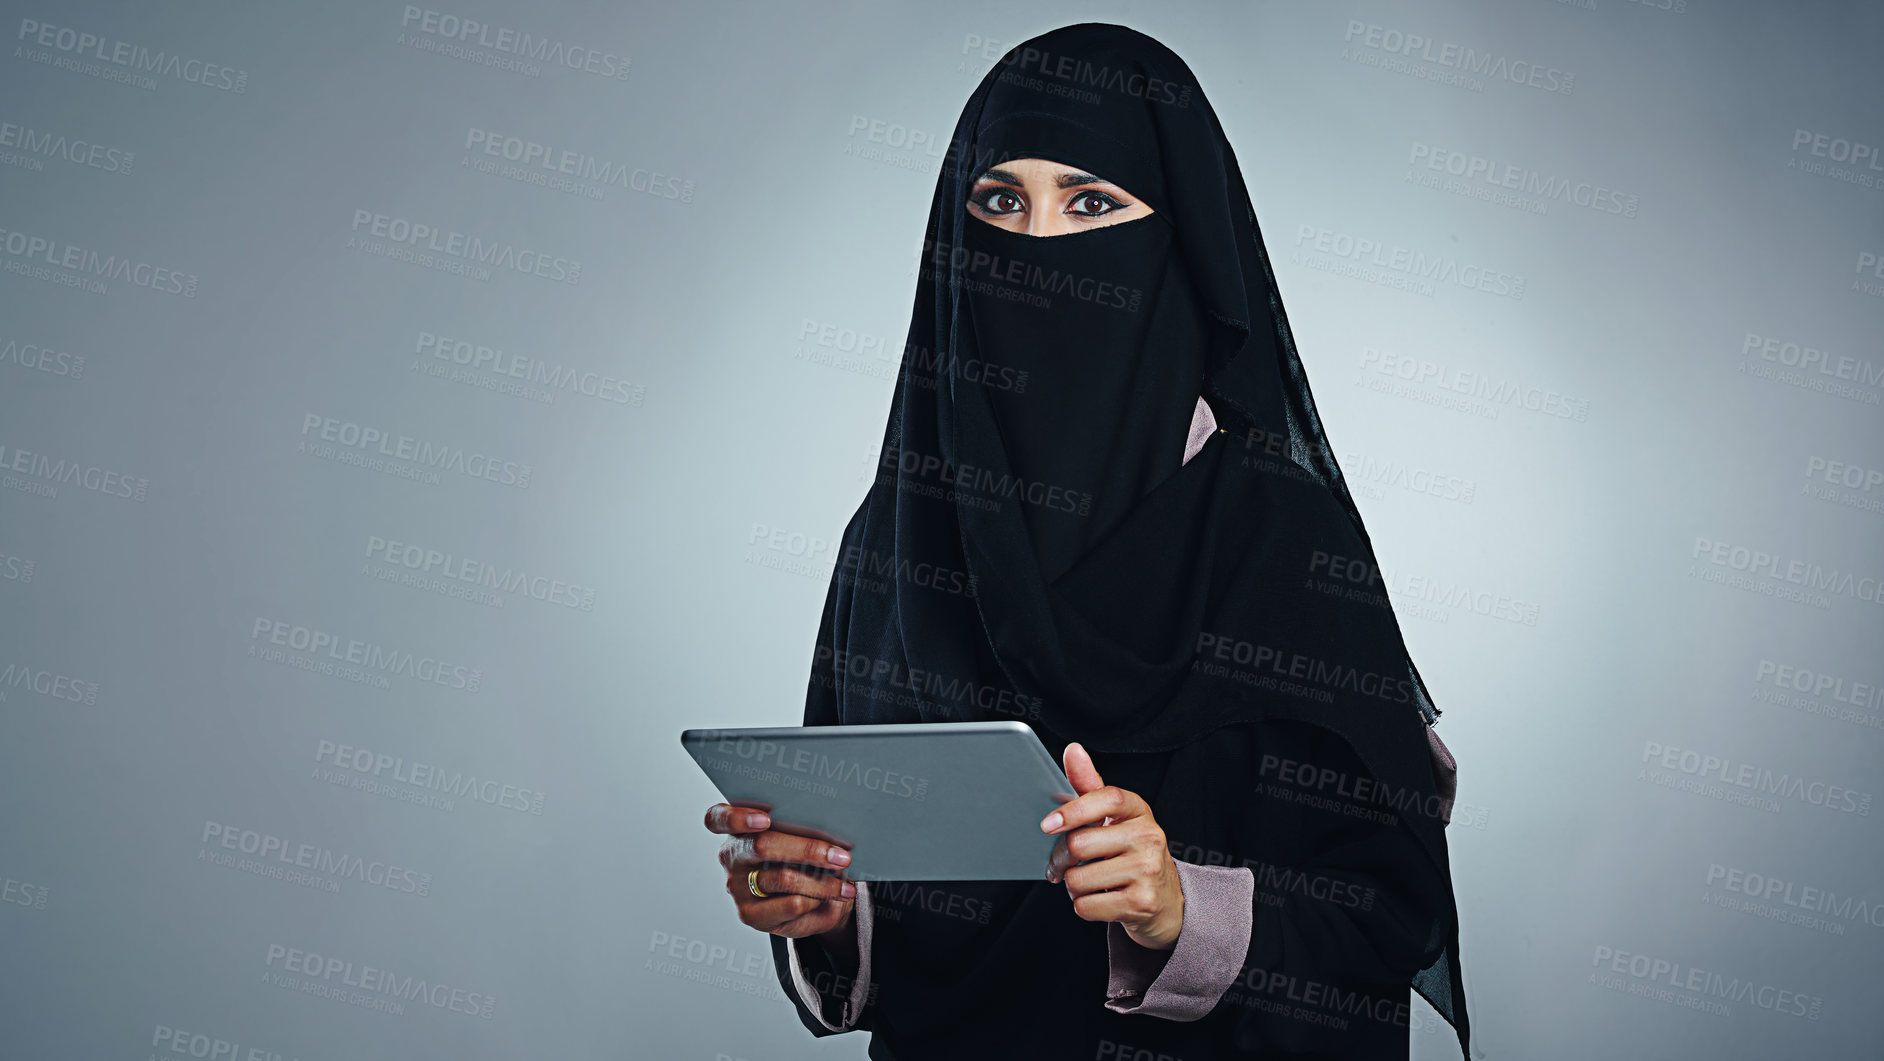 Buy stock photo Studio portrait of a young woman wearing a burqa and using a digital tablet against a gray background